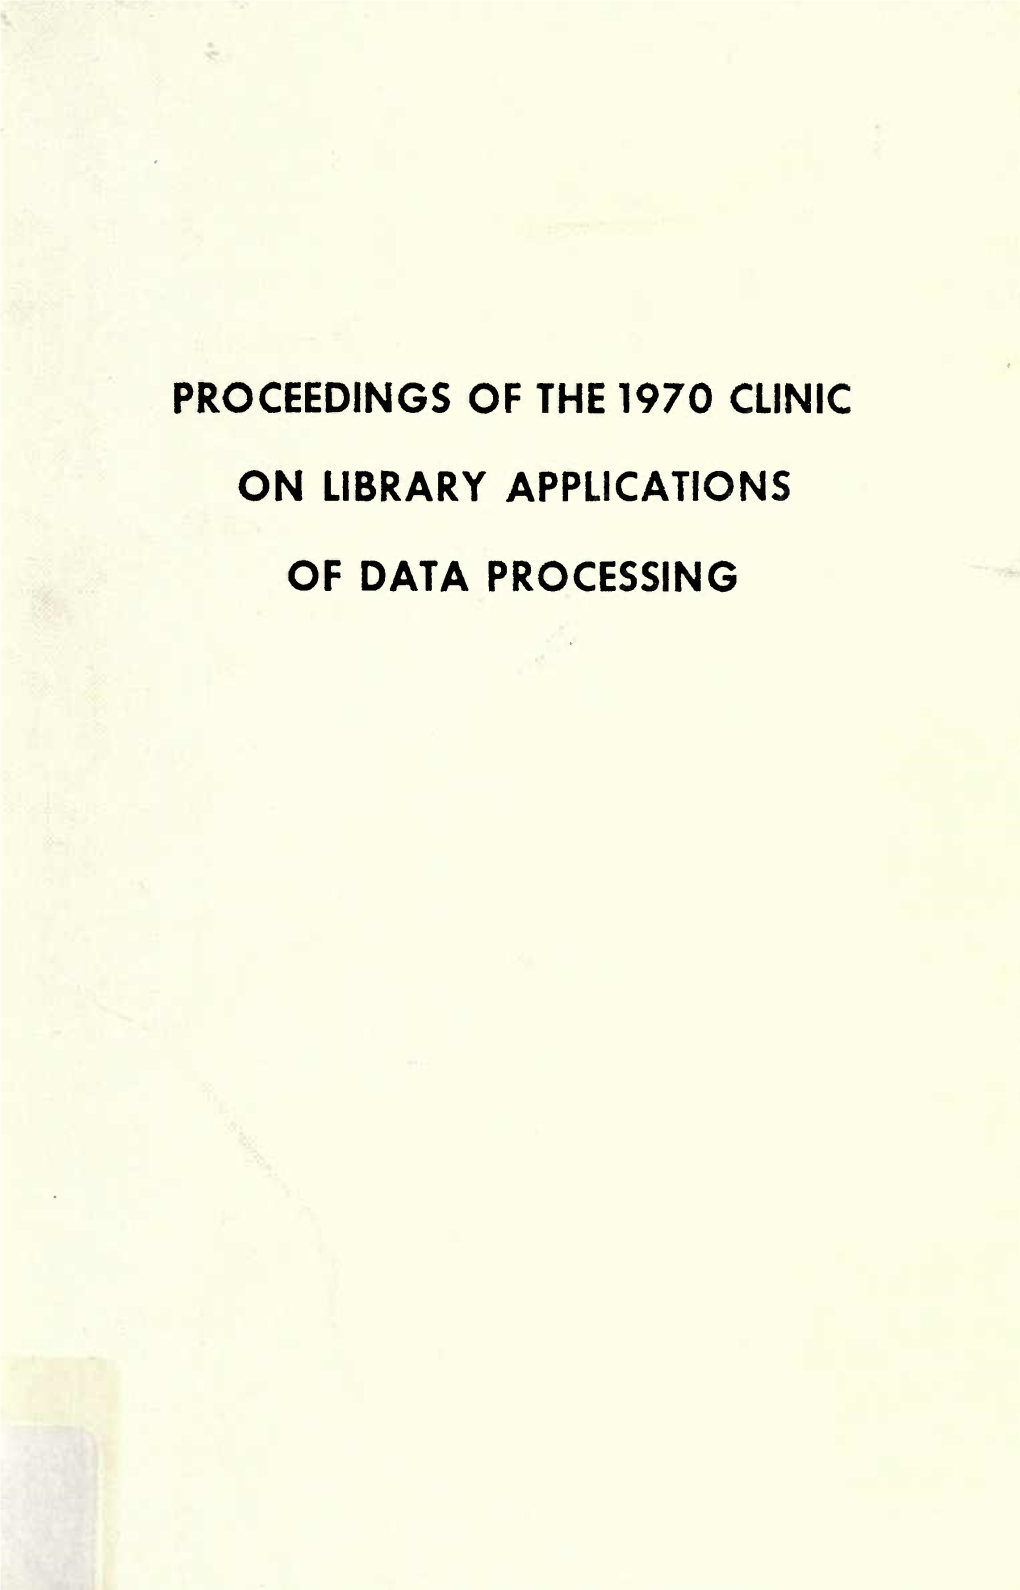 Proceedings of the 1970 Clinic on Library Applications of Data Processing